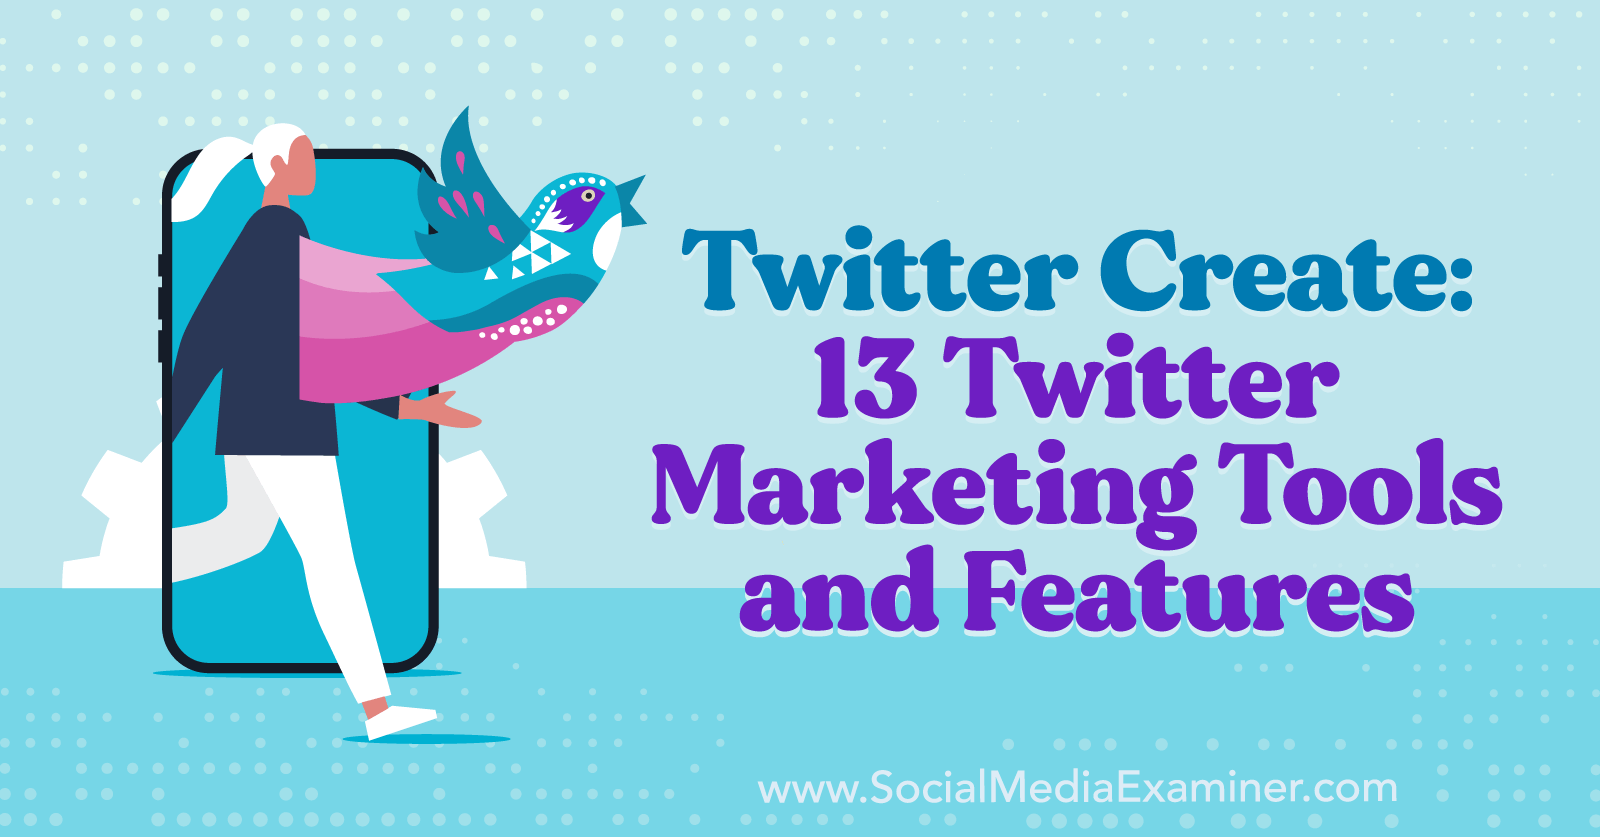 Twitter Create: 13 Twitter Marketing Tools and Features-Social Media Examiner